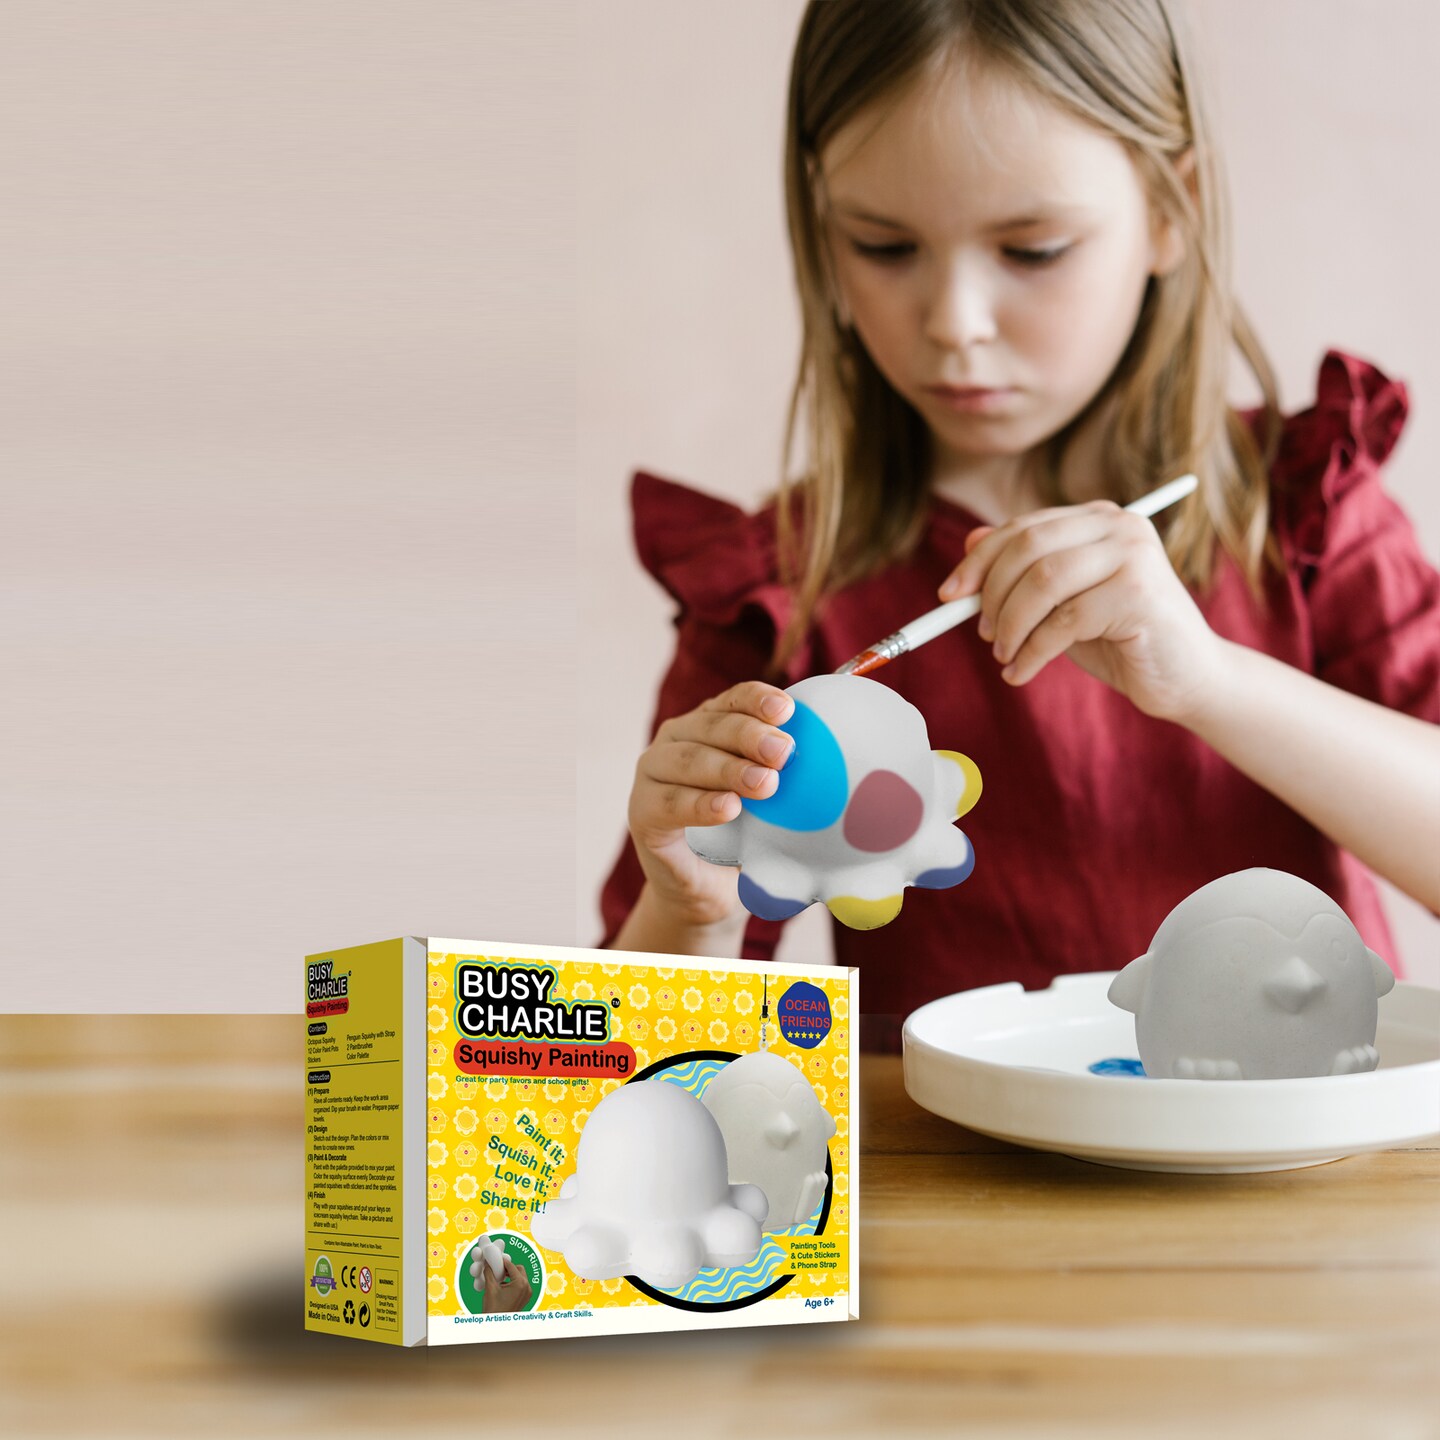 Busy Charlie Squishy Painting Kit - 11 Year Old Girl Poland